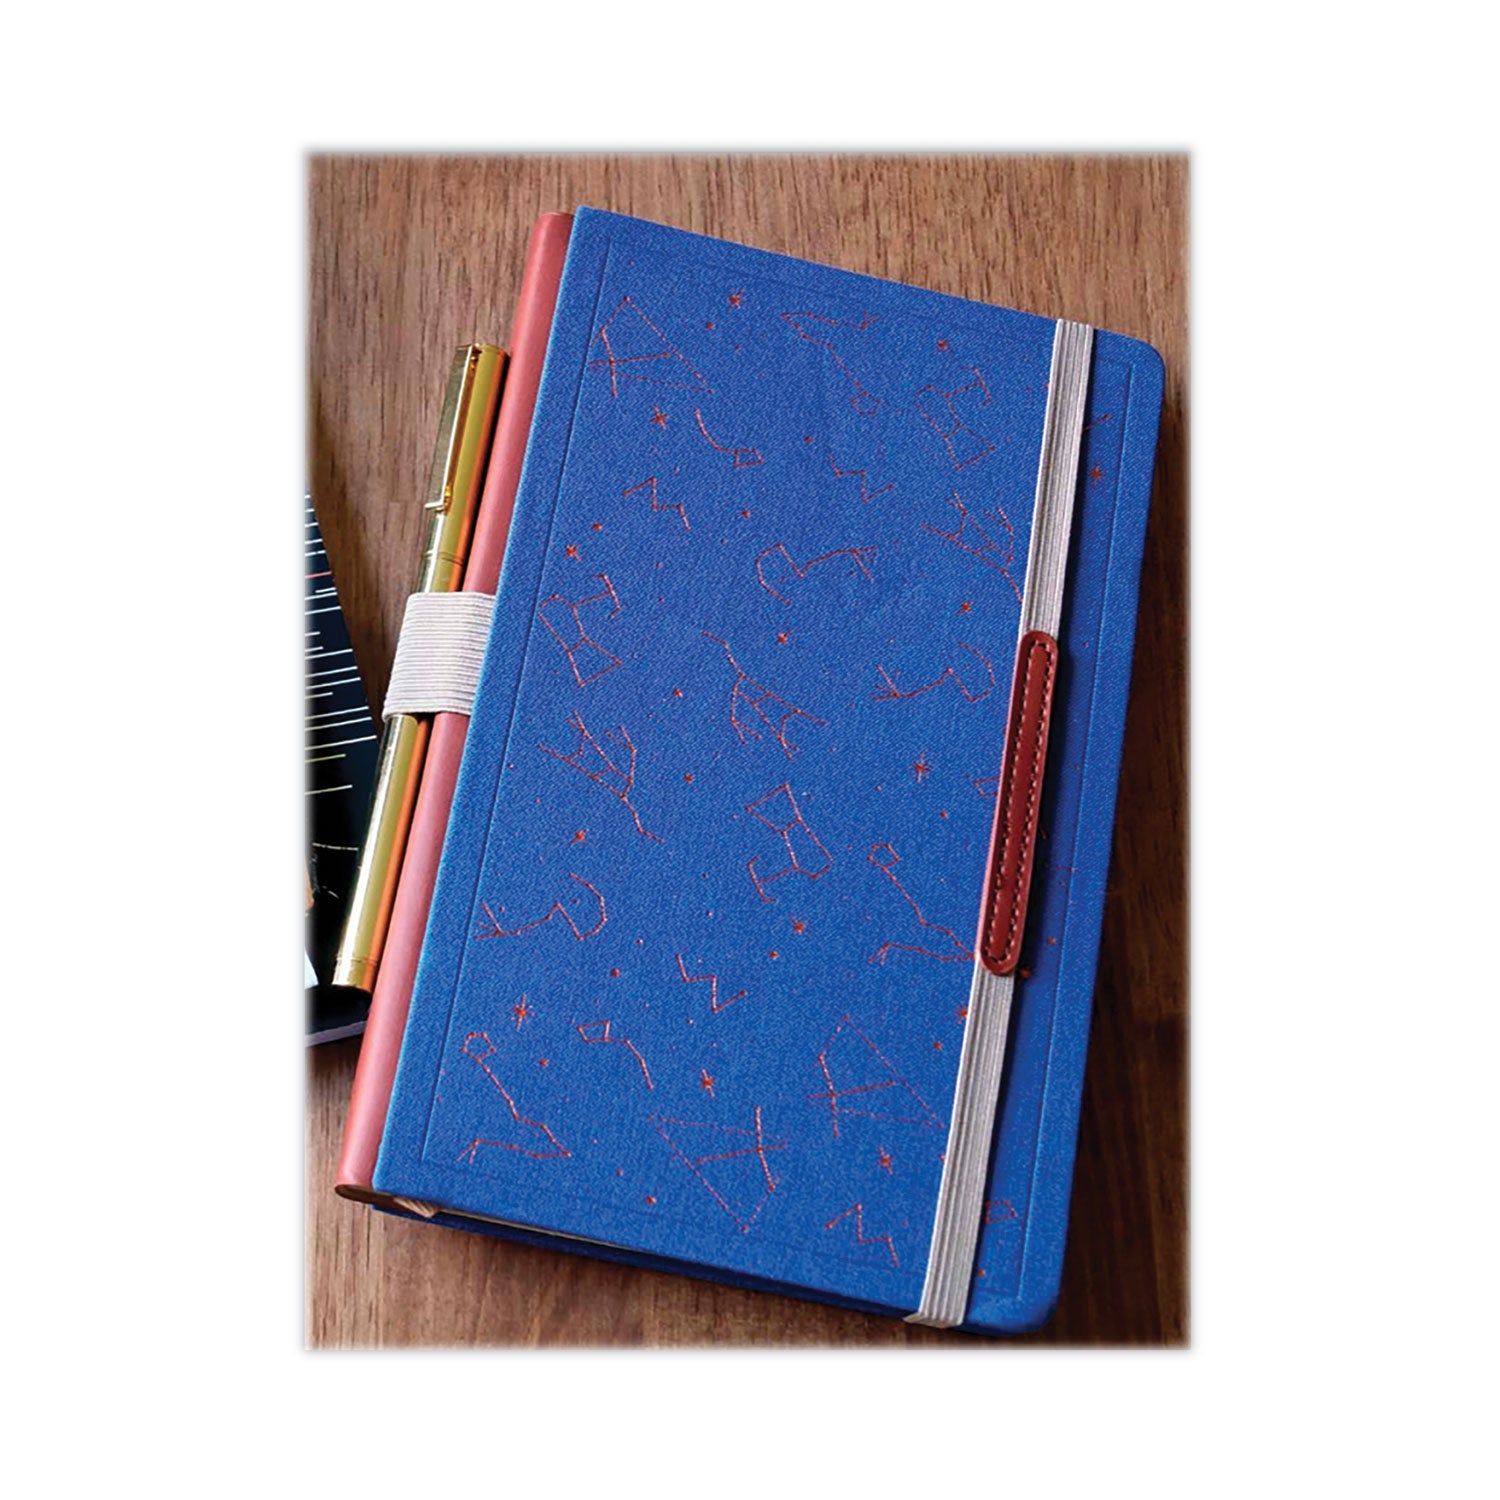 core-collection-embroidered-canvas-layflat-hardbound-journal-constellation-college-rule-blue-red-orange-96-8-x-5-sheets_dnkcore573kl - 1